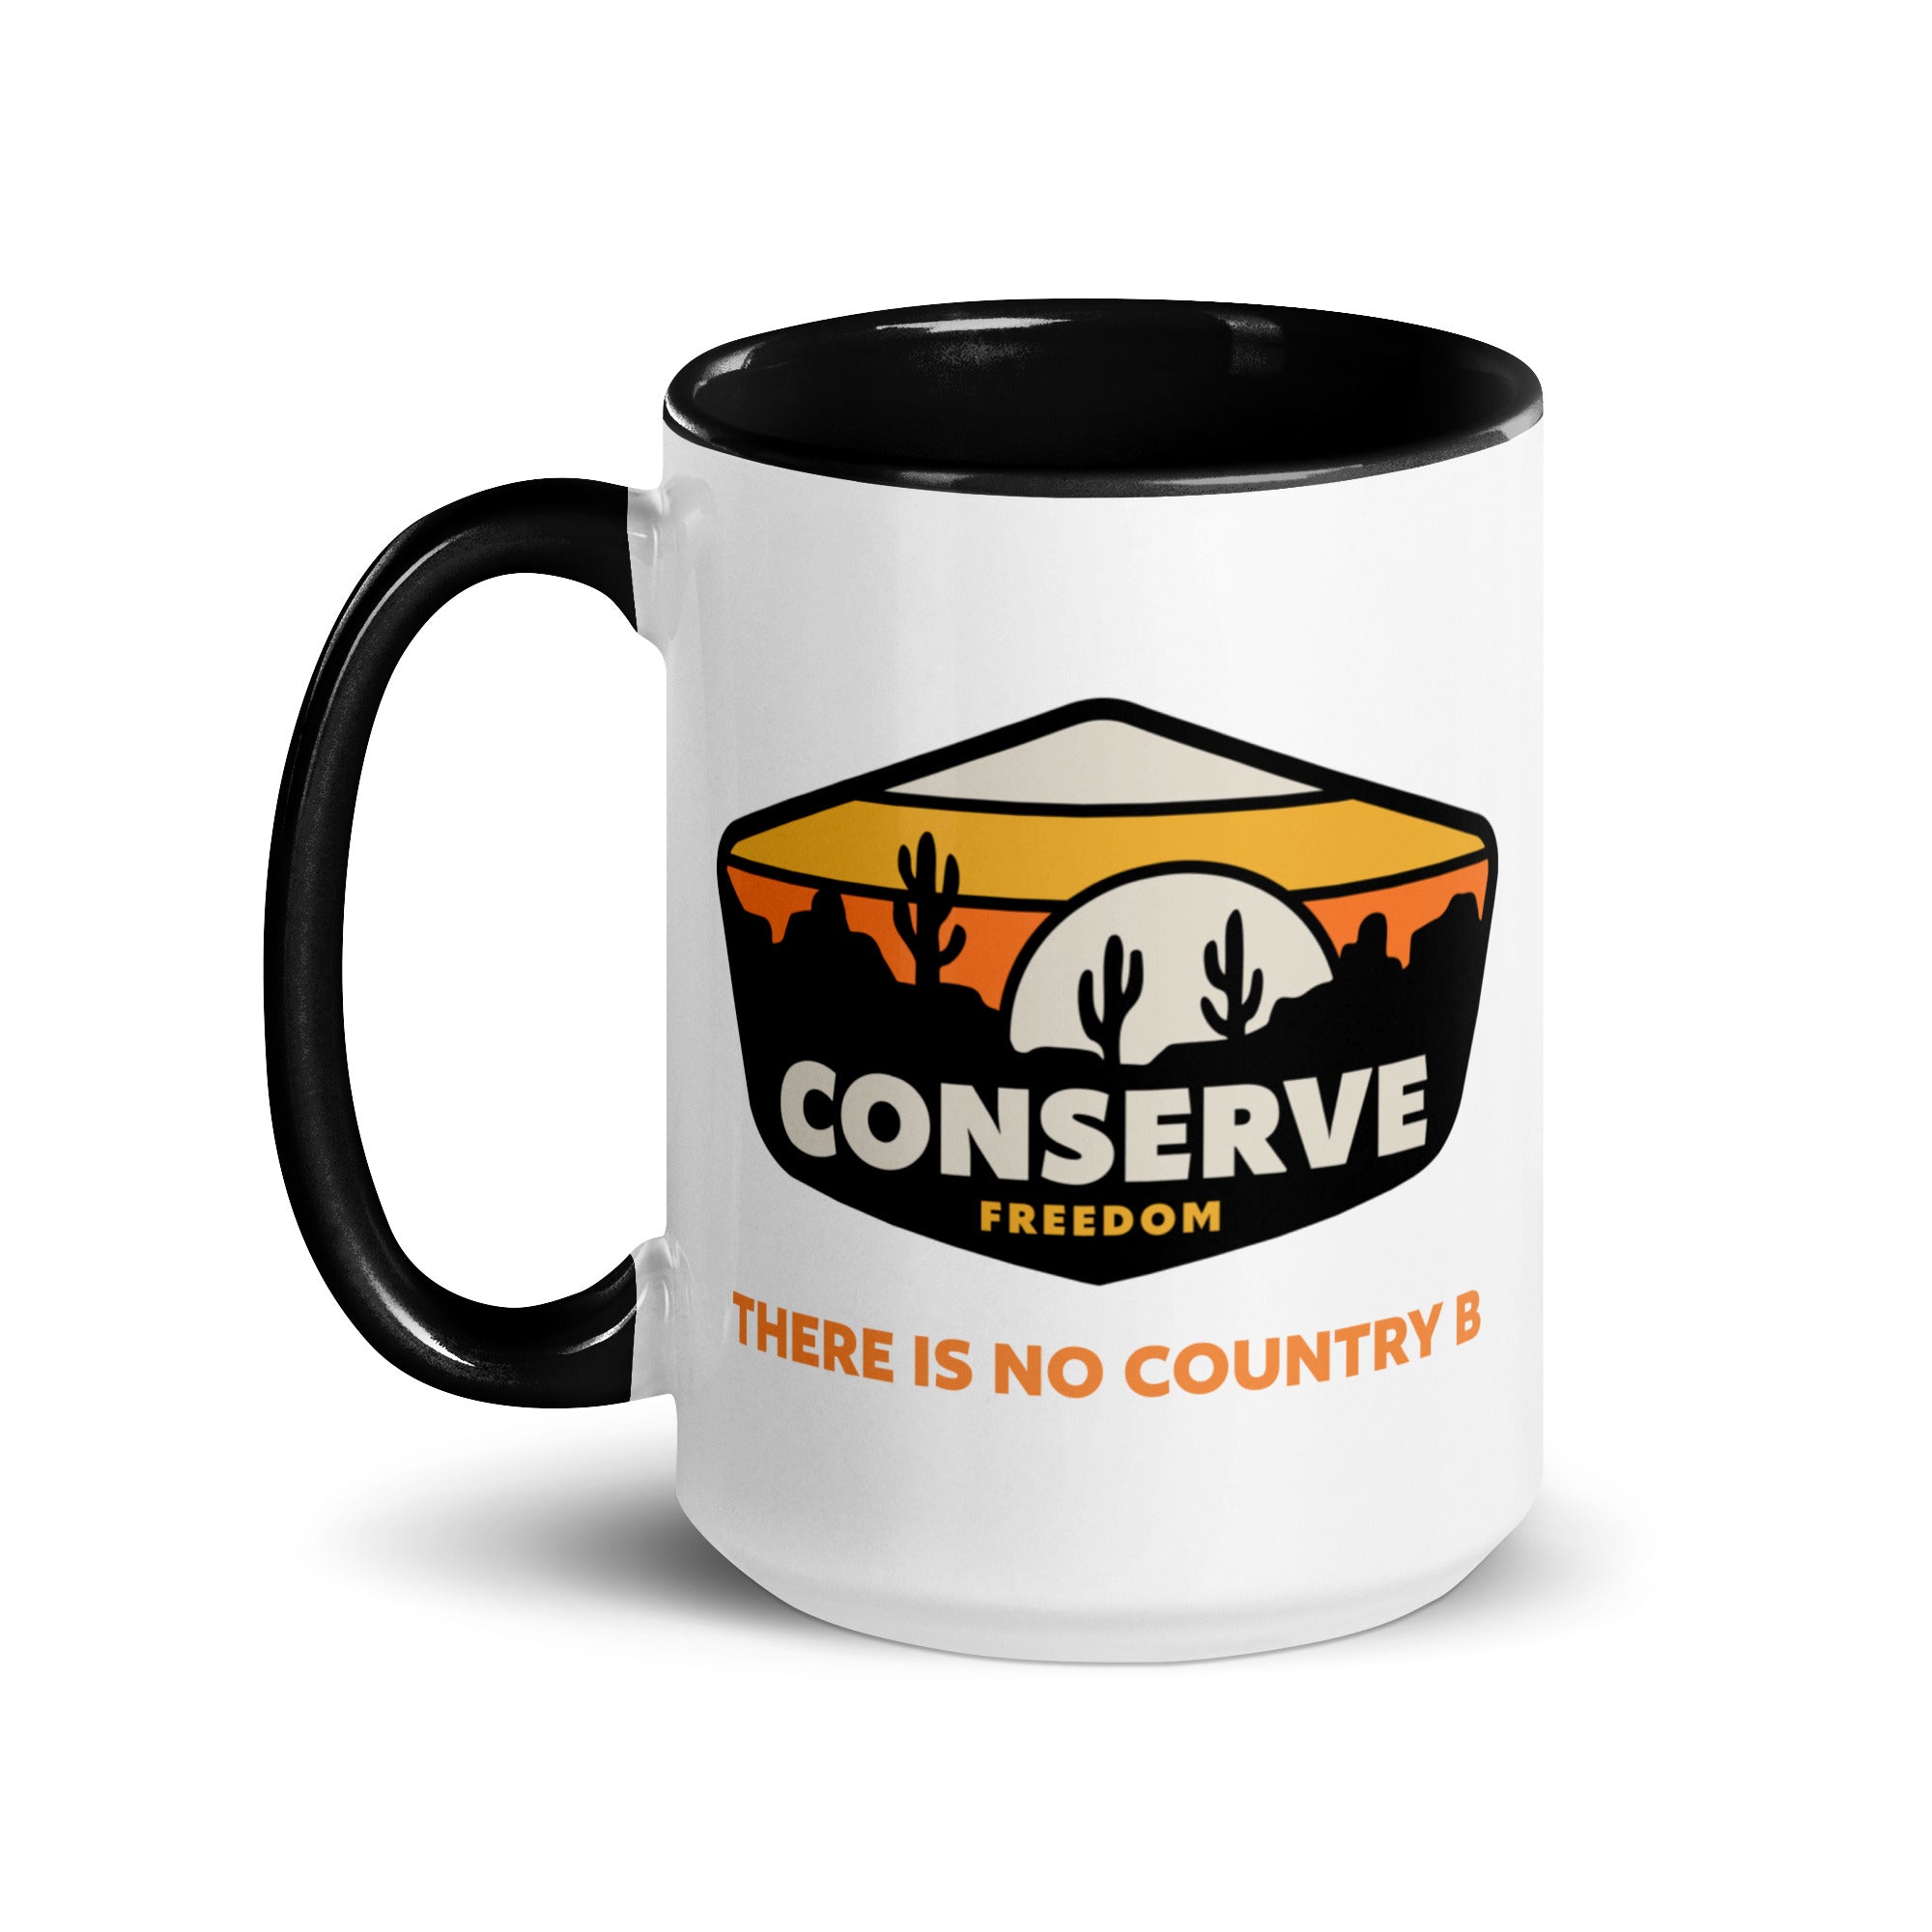 Conserve Freedom There is No Country B Mug